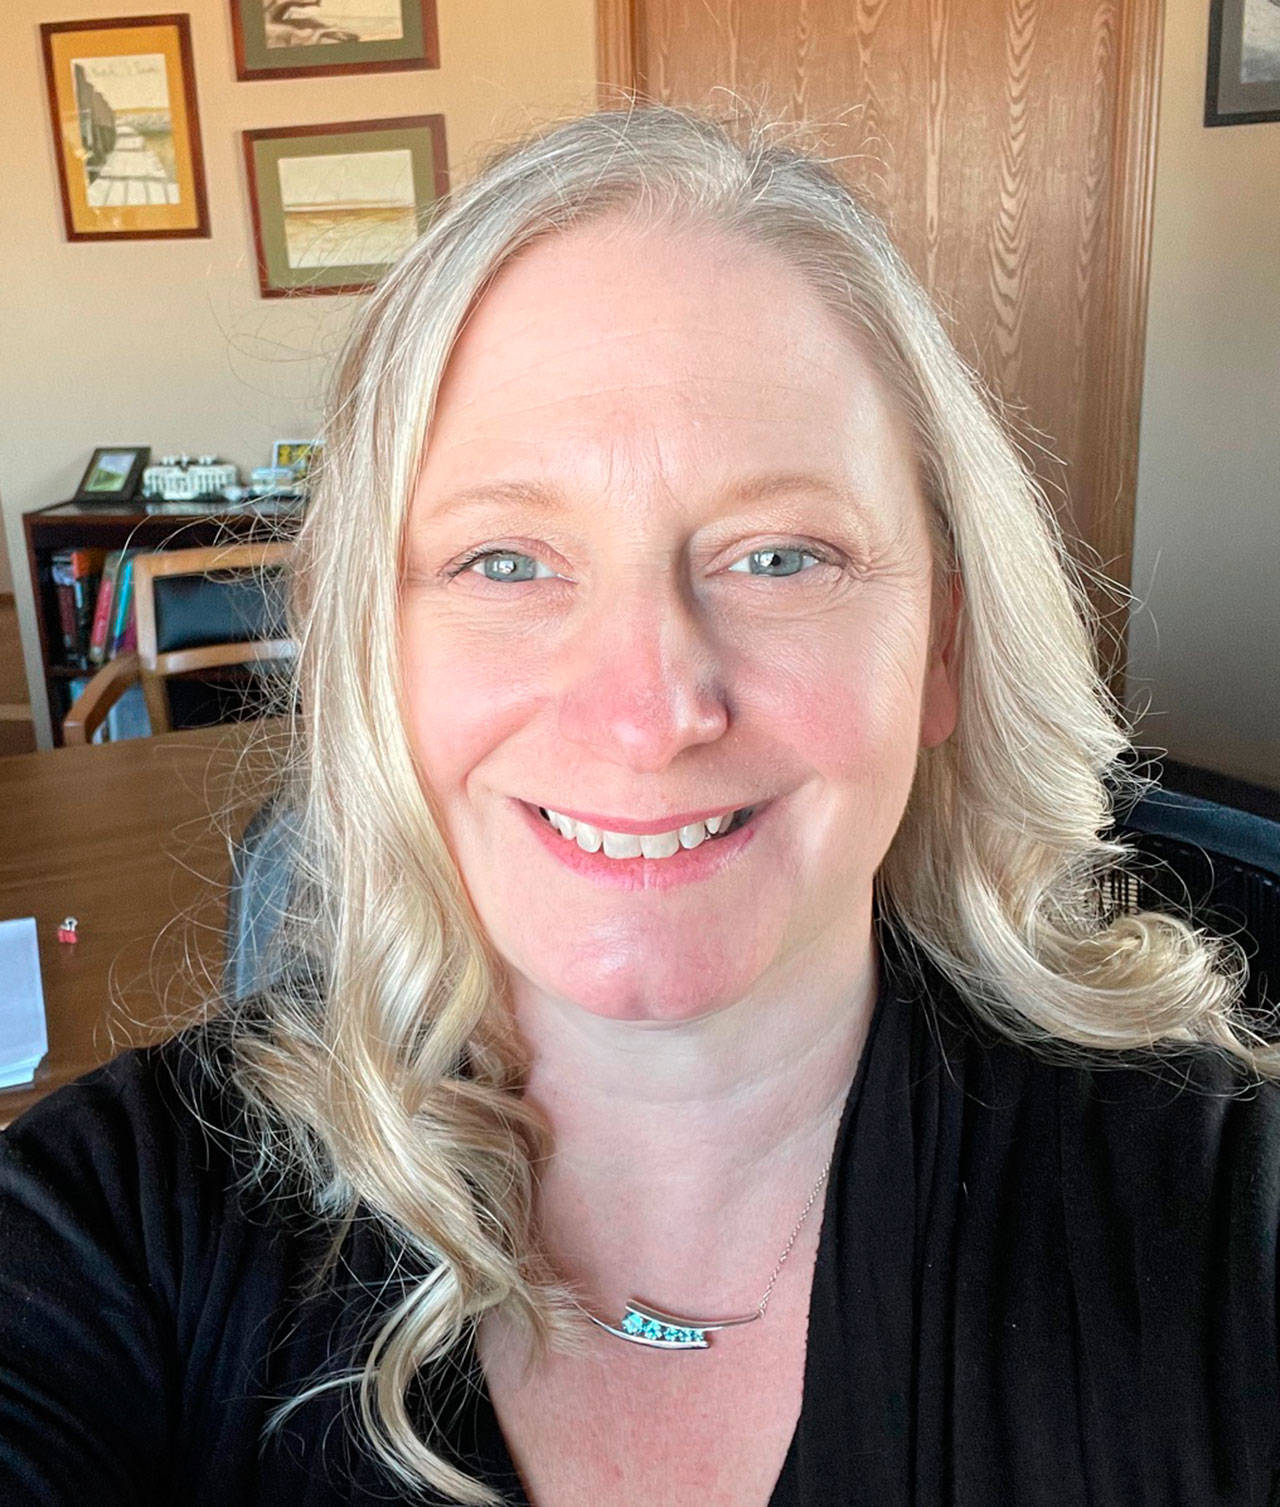 Peninsula Behavioral Health CEO Wendy Sisk presents “Nurturing Your Mental Health,” a free radio presentation from 2-3 p.m. on May 12 on KSQM 91.5 FM. Submitted photo